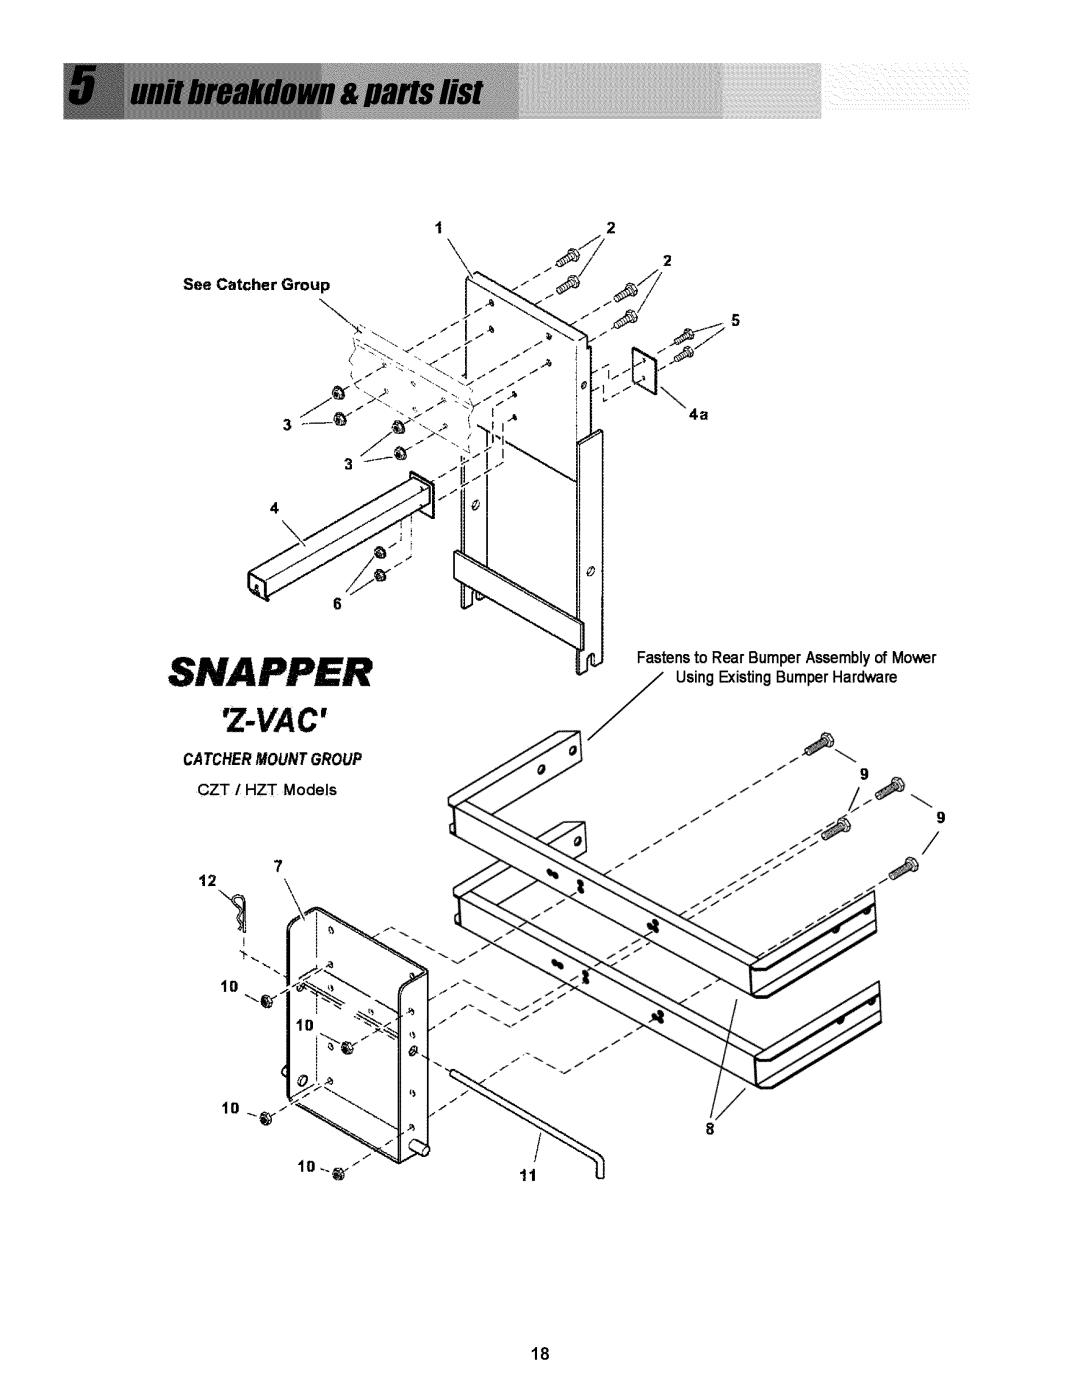 Snapper P/N 7078273, 0-50576 manual Snapper, Z-Vac, Catchermountgroup, See Catcher Group 